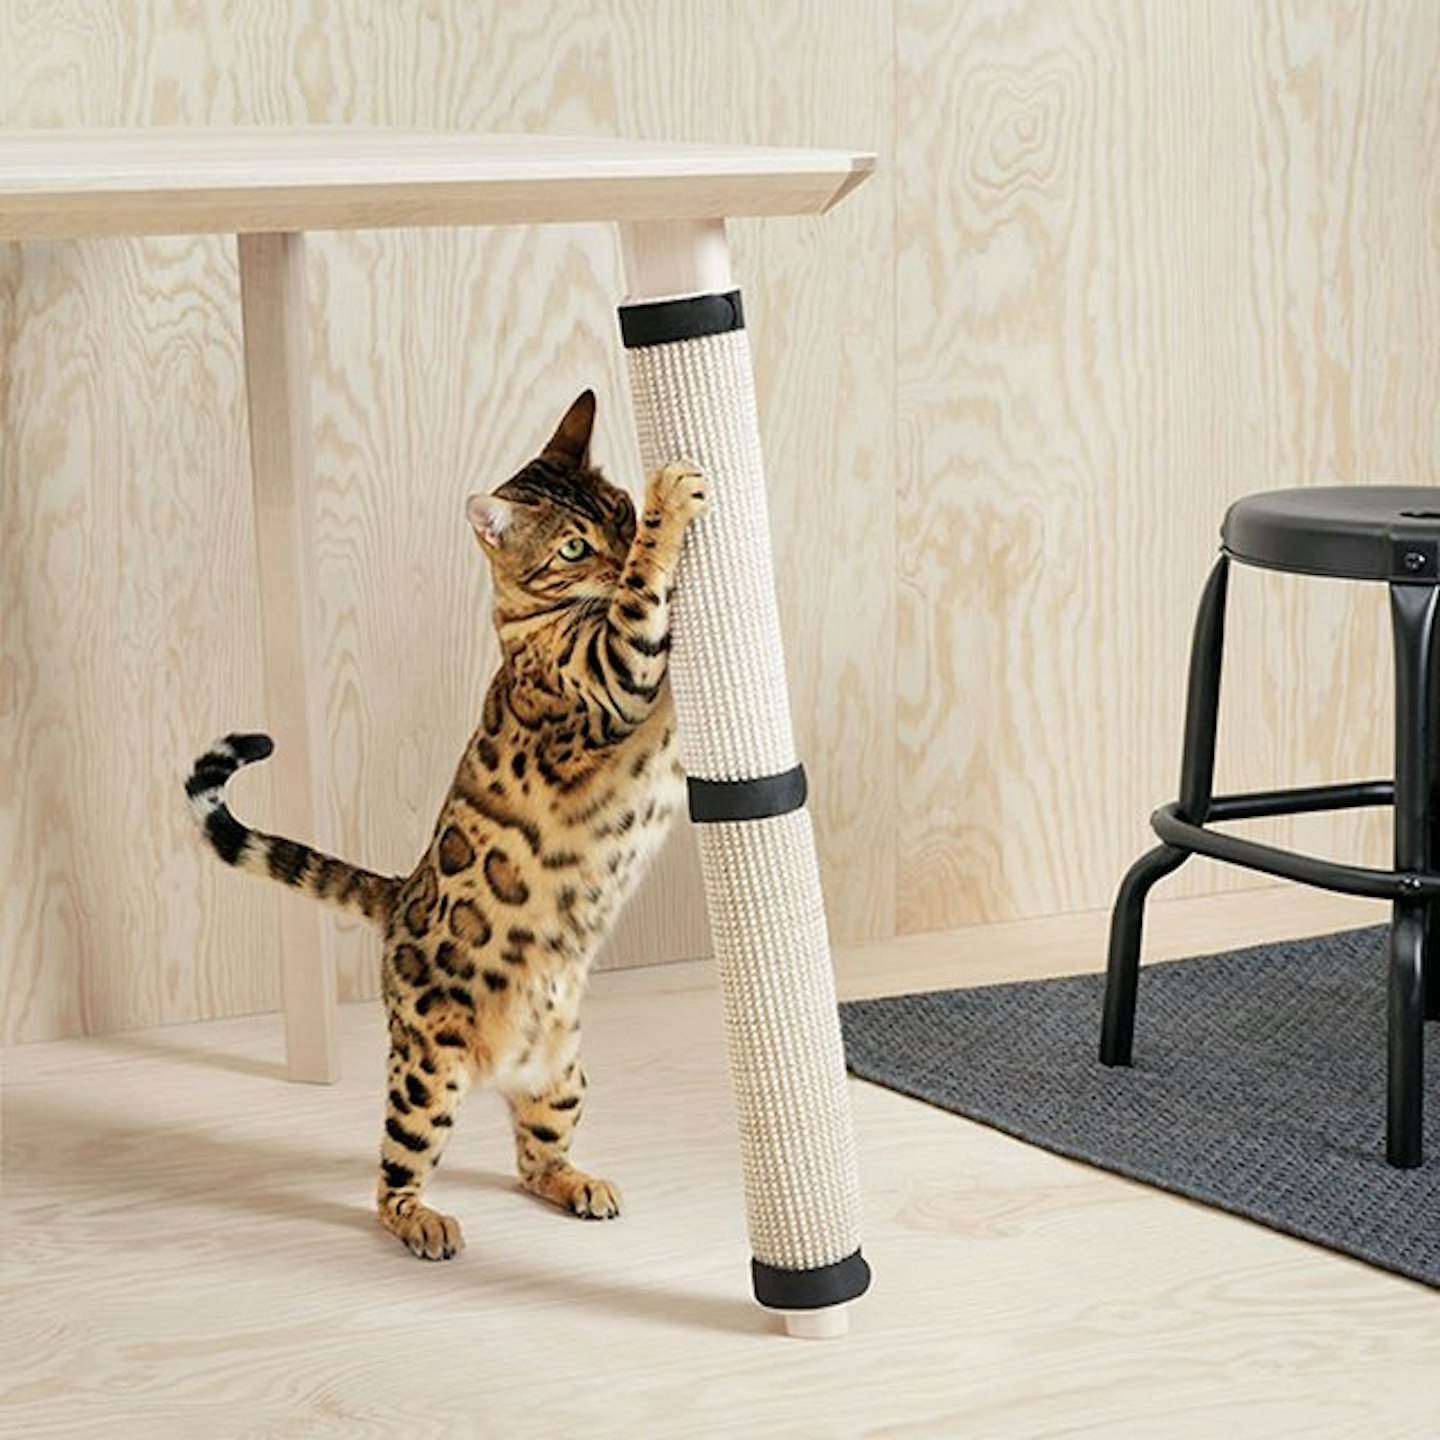 You Can Now Buy Ikea Furniture For Your Pet